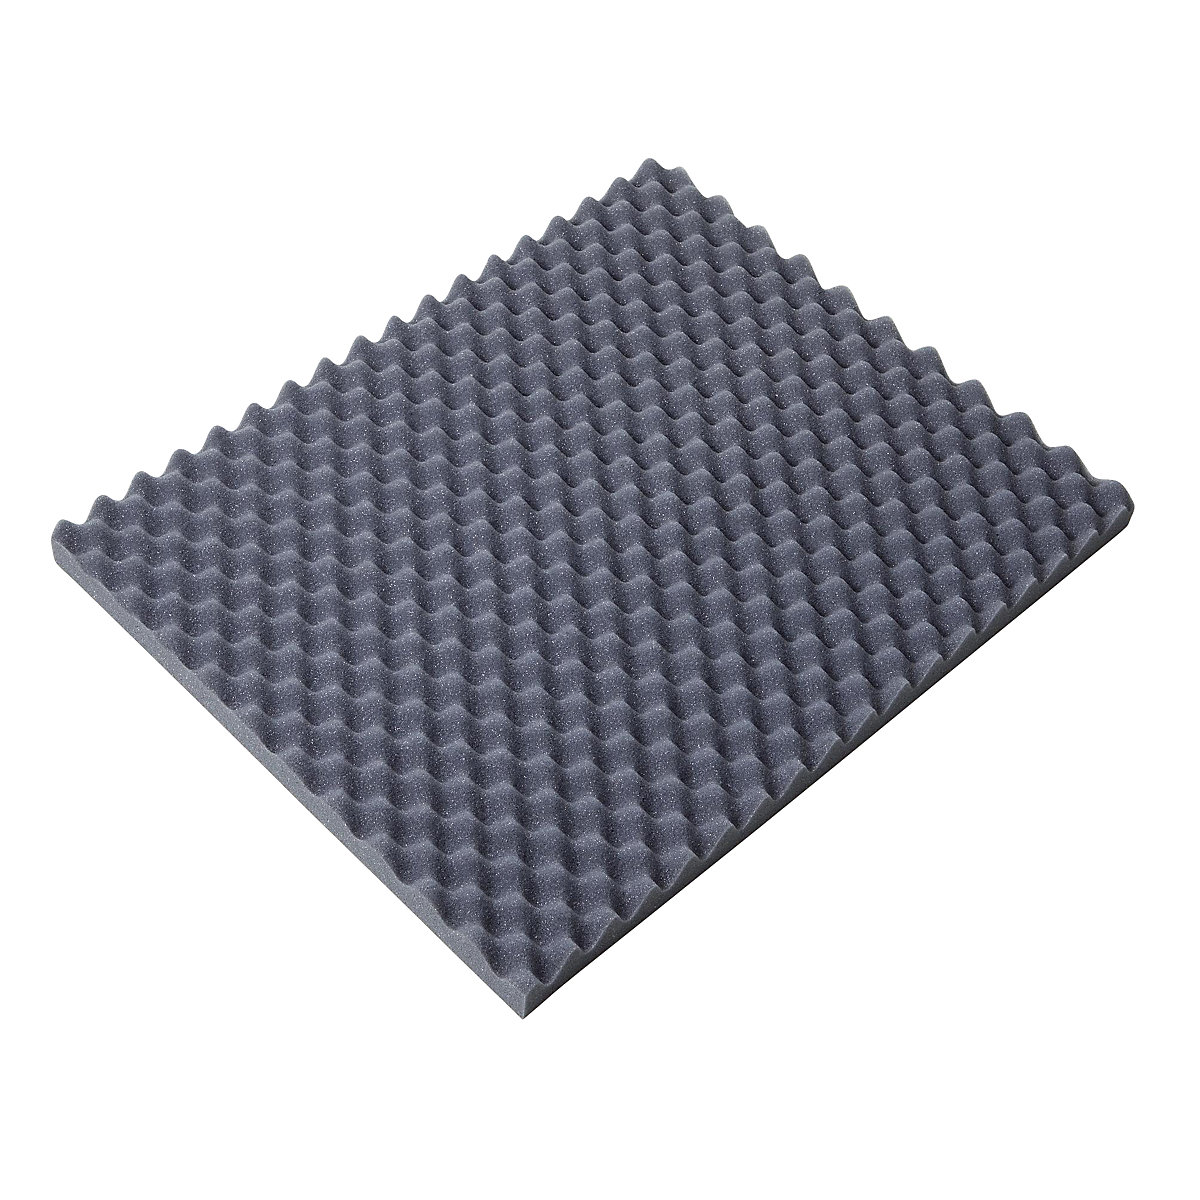 Egg crate foam sheet, 40 mm thick, LxW 500 x 400 mm, pack of 26-10